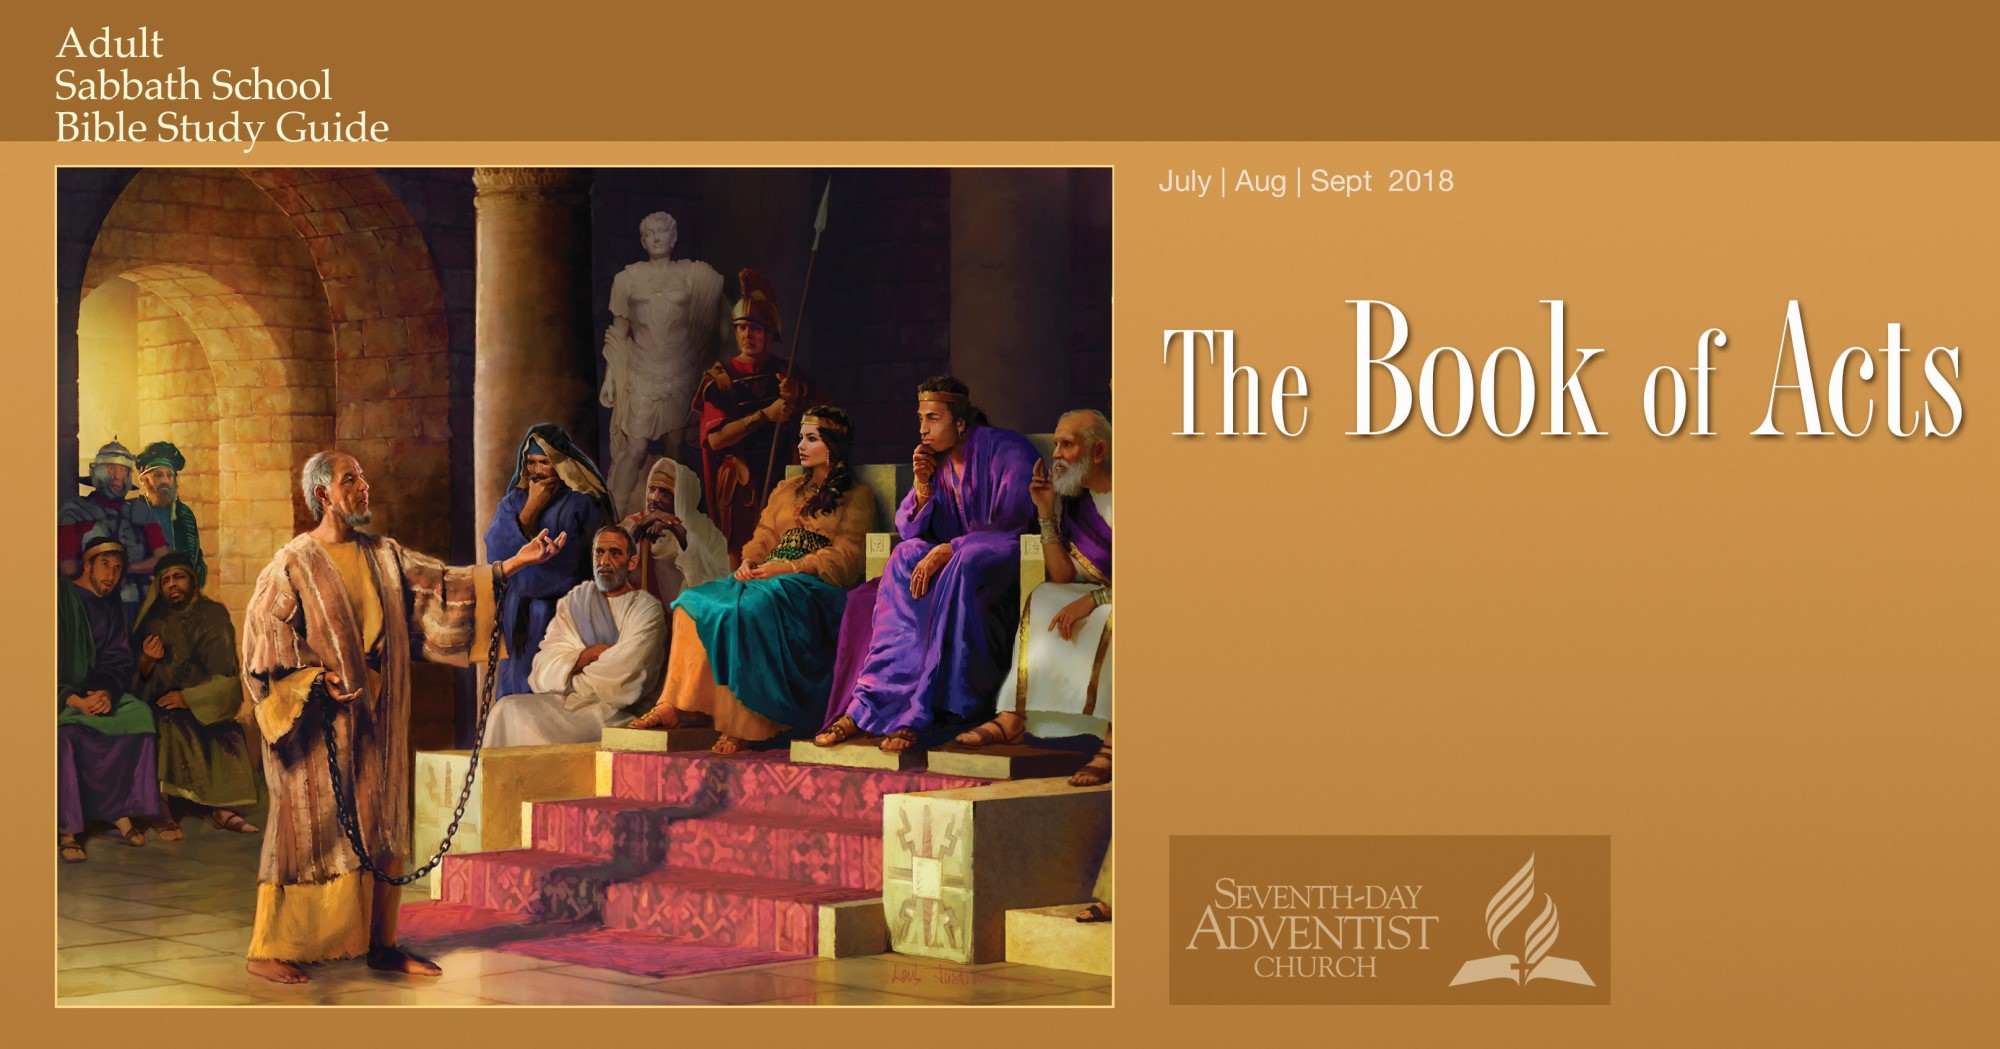 The Book of Acts (3rd Quarter 2018) - Sabbath School Lesson Quarterly. Quarterly lesson for in-depth Bible study of Word of God.